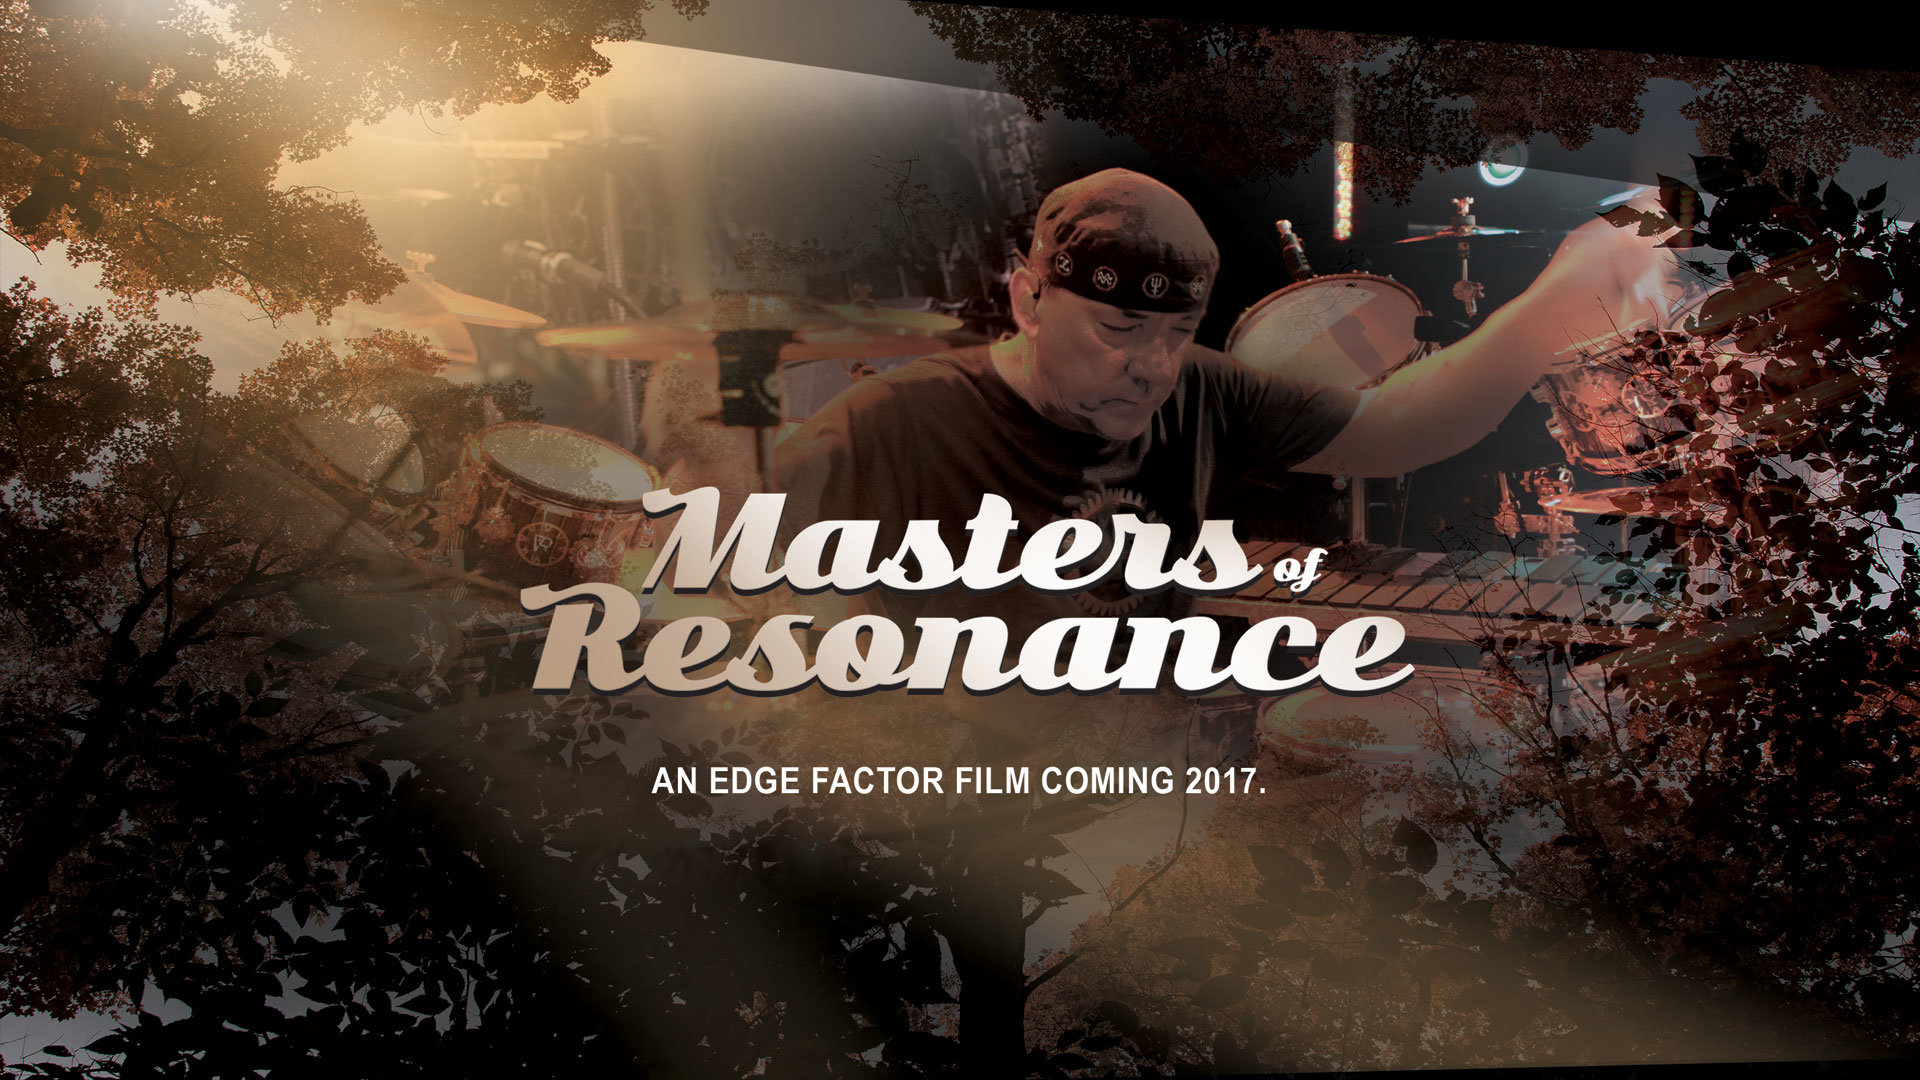 Edge Factor film, Masters of Resonance with Rush Drummer Neil Peart 